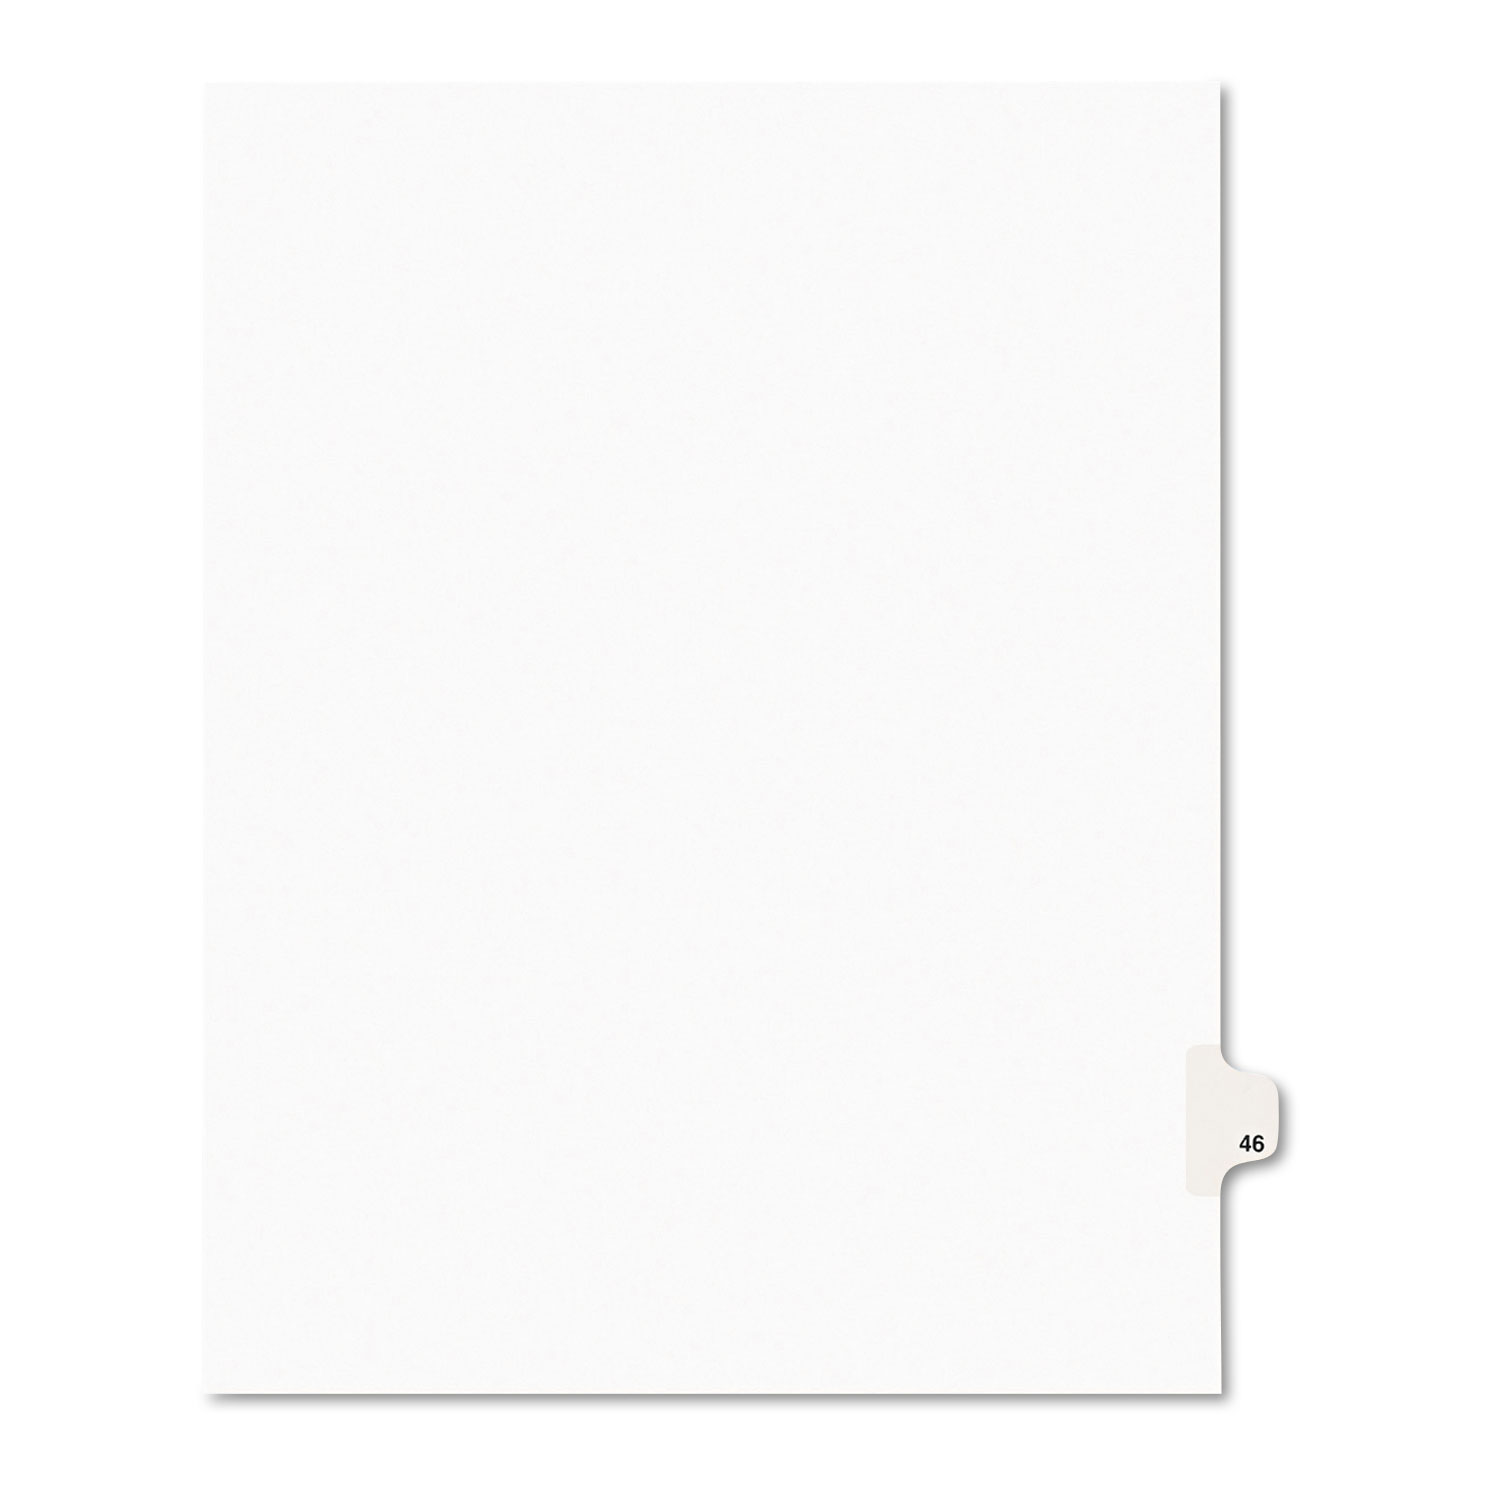  Avery 01046 Preprinted Legal Exhibit Side Tab Index Dividers, Avery Style, 10-Tab, 46, 11 x 8.5, White, 25/Pack (AVE01046) 